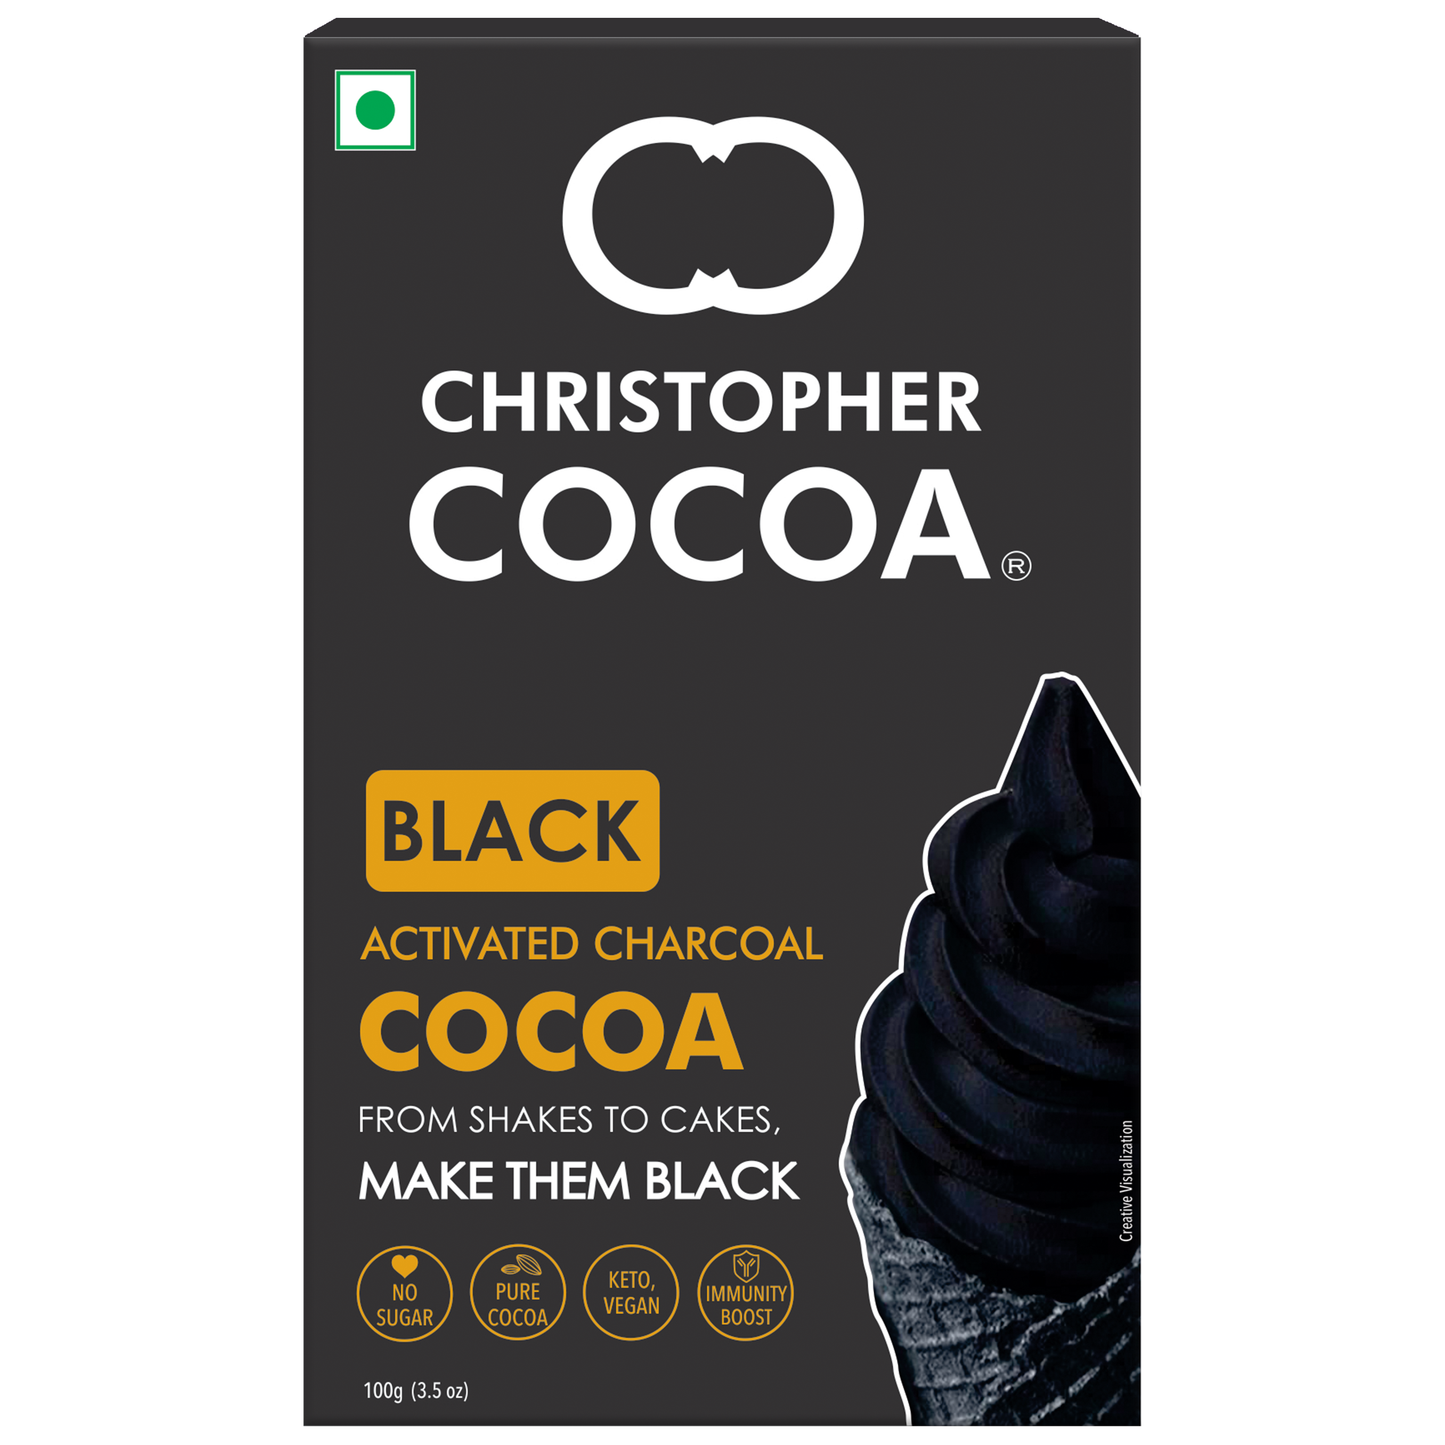 Activated Charcoal Dark Cocoa Powder, Black, Unsweetened, 100g (Bake, Cake, Hot Chocolate, Drinking Shakes) 